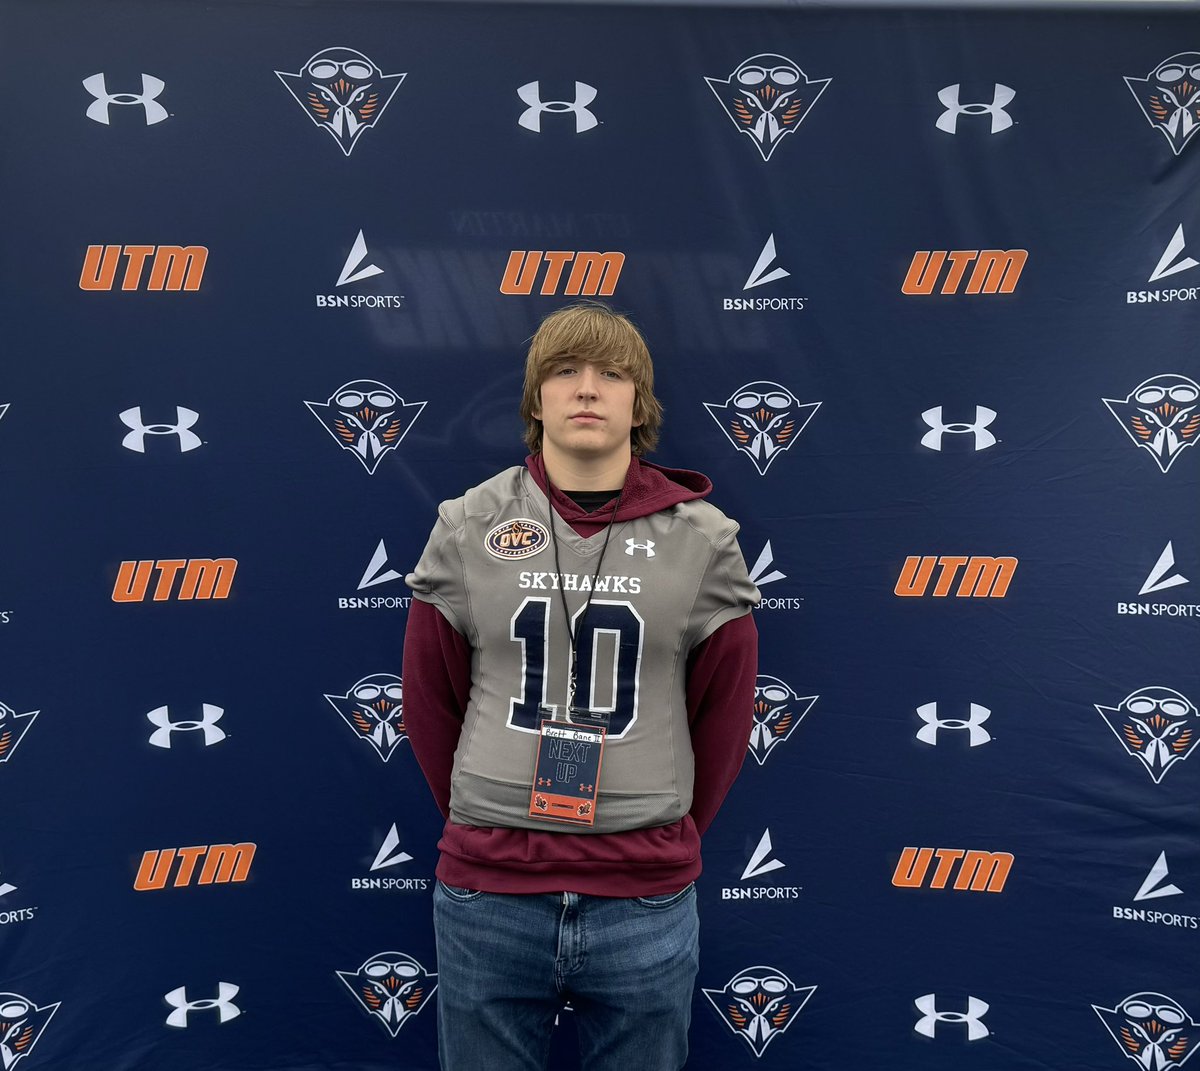 Had a a great time at @UTM_FOOTBALL spring game. Thank you @CoachSantana_ for the invite to the Junior day. @CoachModelski @Turks_football